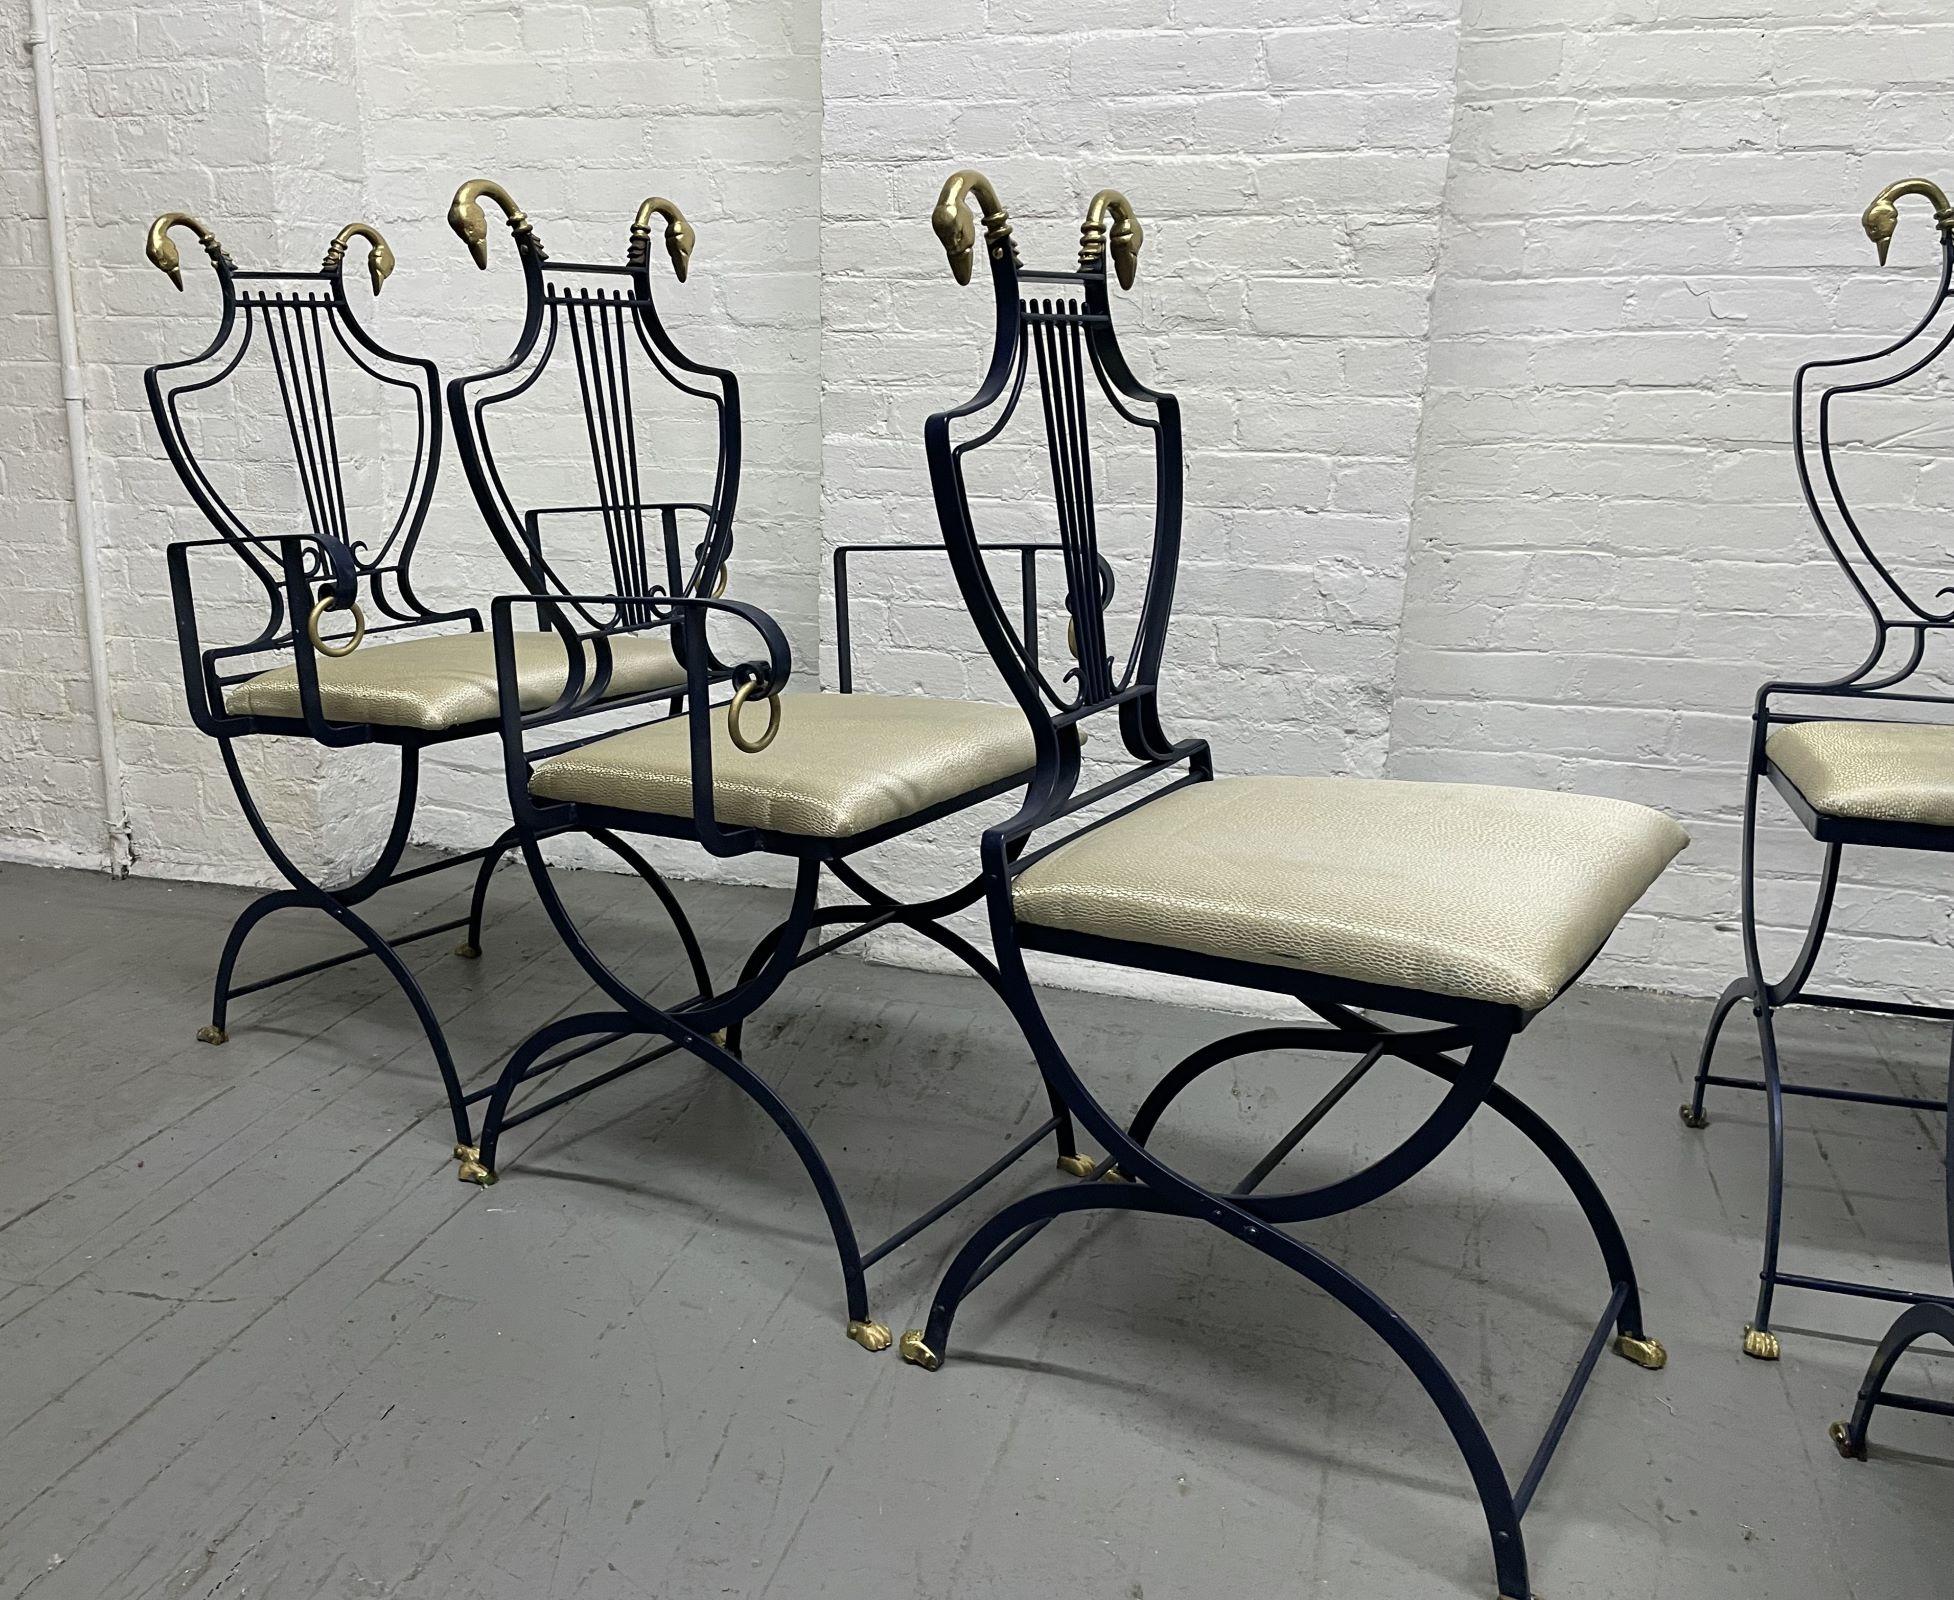 Set of 6 Maison Jansen Swan and Lyre Back Chairs. The folding chairs have brass swans to the top on each side. The frames of the chairs are dark blue with claw feet. Two of the chairs have arms. The chairs can also be used as dining chairs.  Can be